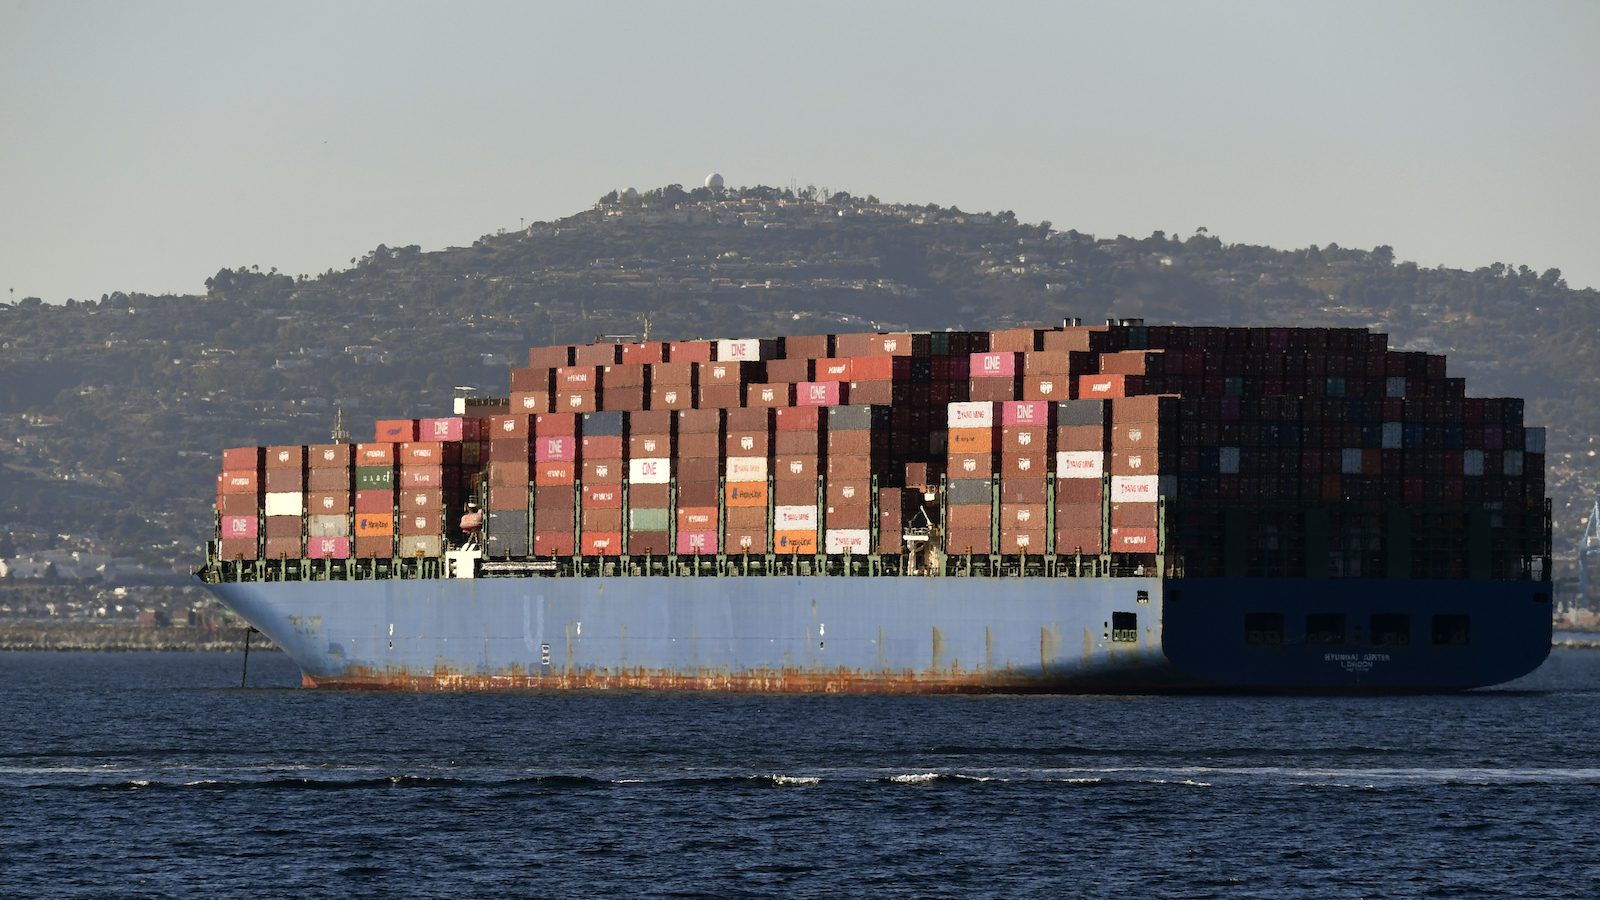 A large cargo ship on the ocean with a hill in the background